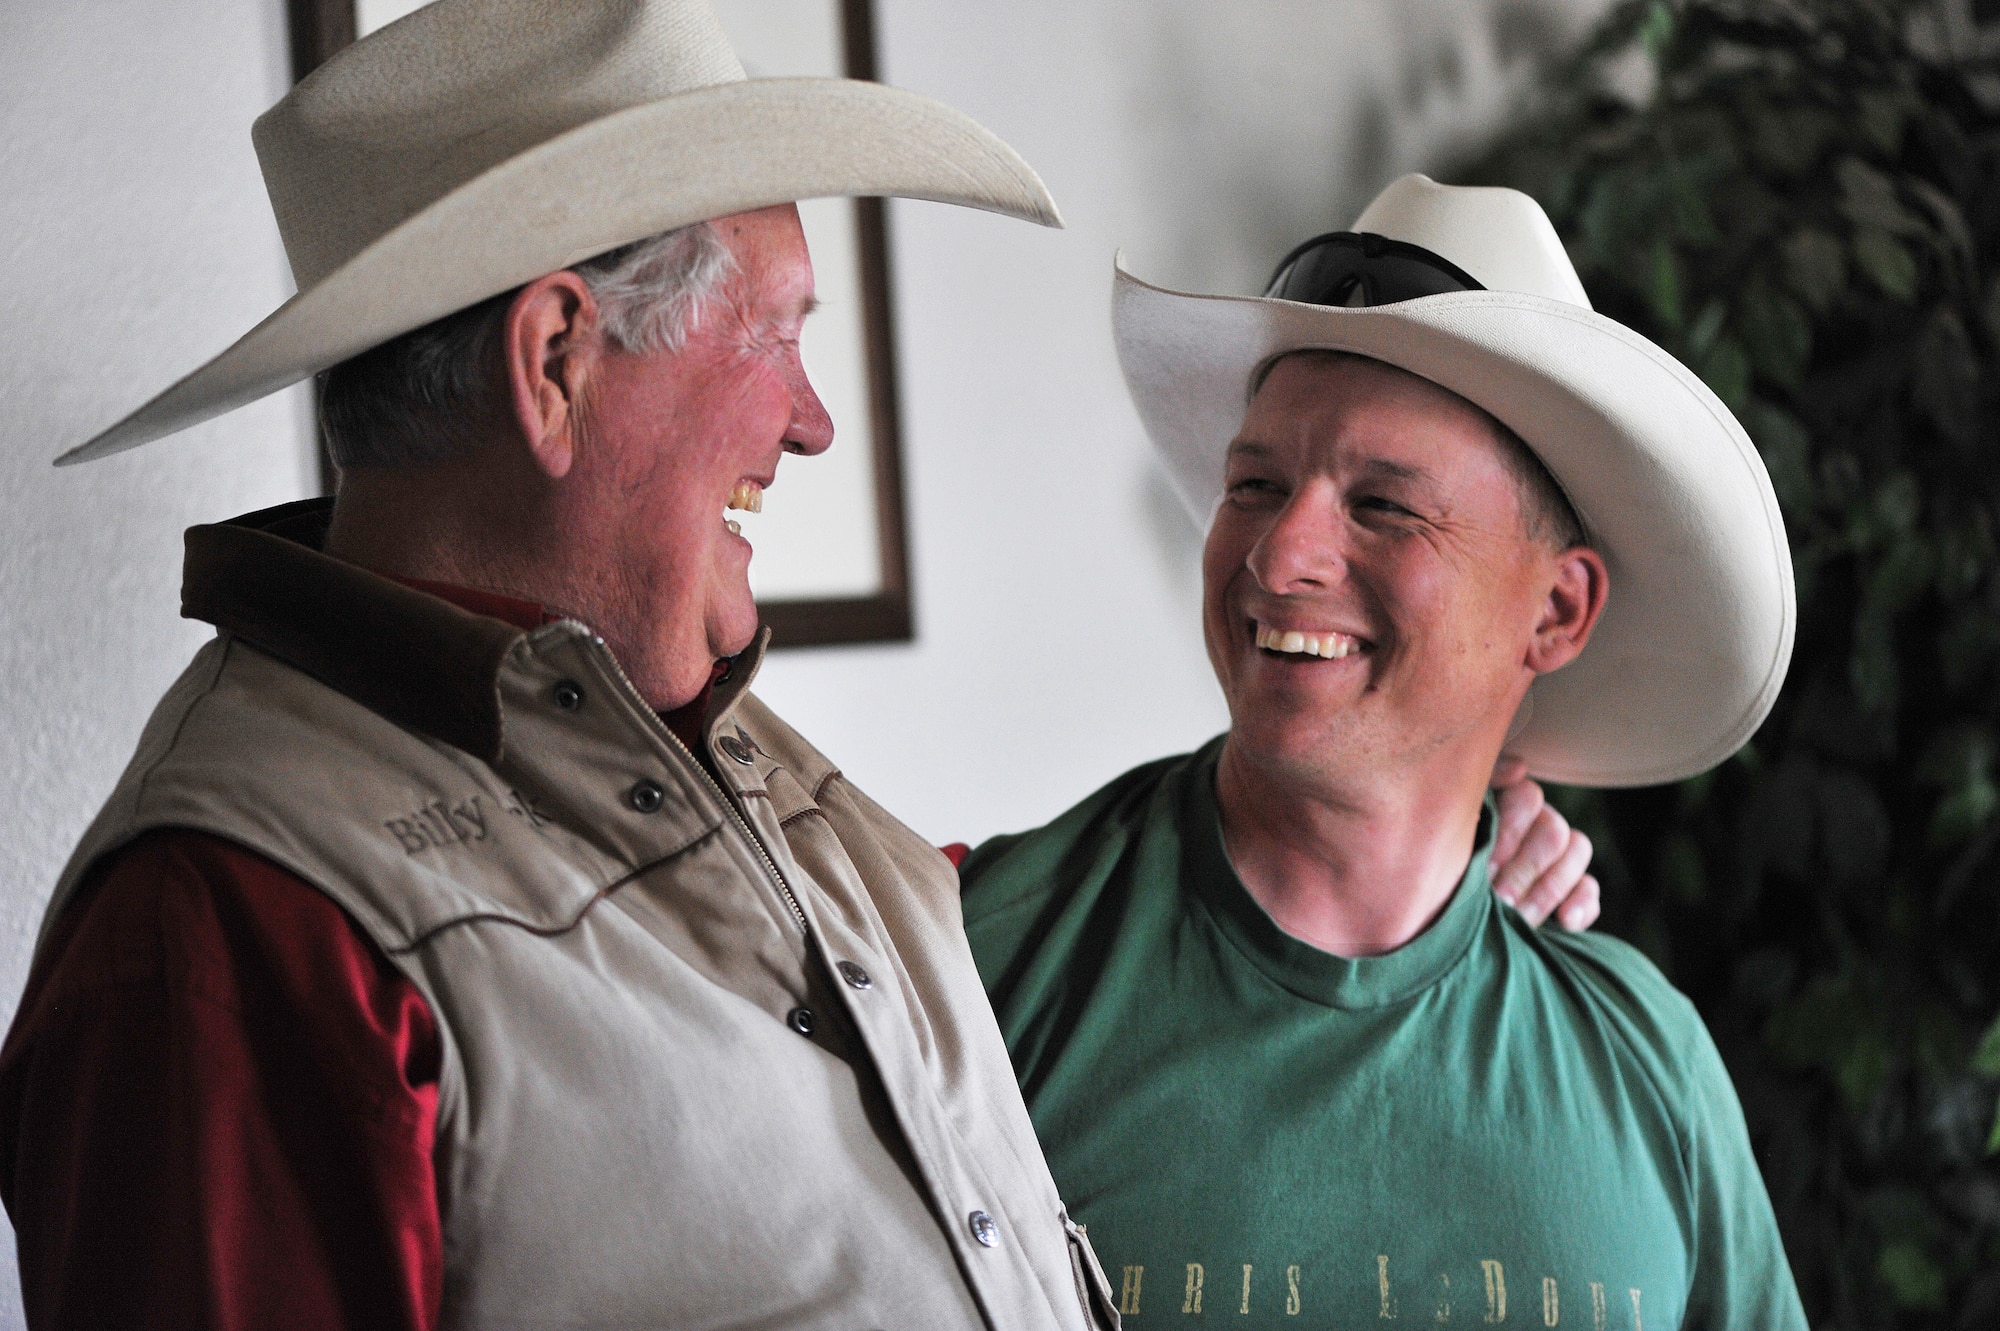 U.S. Army Sgt. Dale Chick (right) shares a light moment with Billy Jack Barrett at the equestrian center April 27, 2012, at the U.S. Air Force Academy in Colorado Springs, Colo. Chick said that volunteering at the stables and working with horses help them find inner peace and comfort after being deployed in Iraq and Afghanistan. Barrett is the director of the center. (U.S. Air Force photo/Val Gempis)